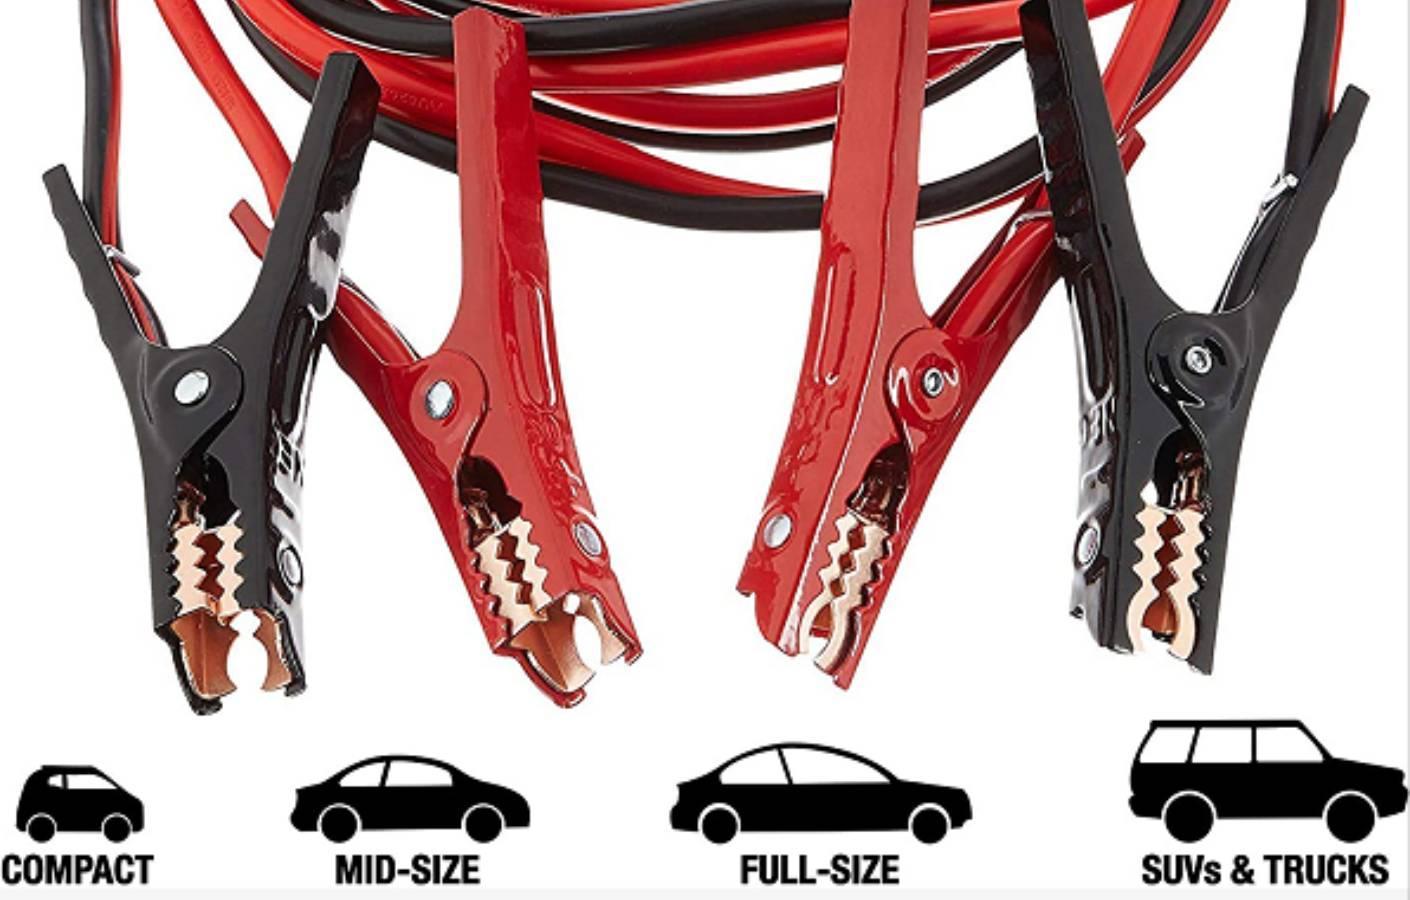 How to Use Jumper Cables - Lokithorshop